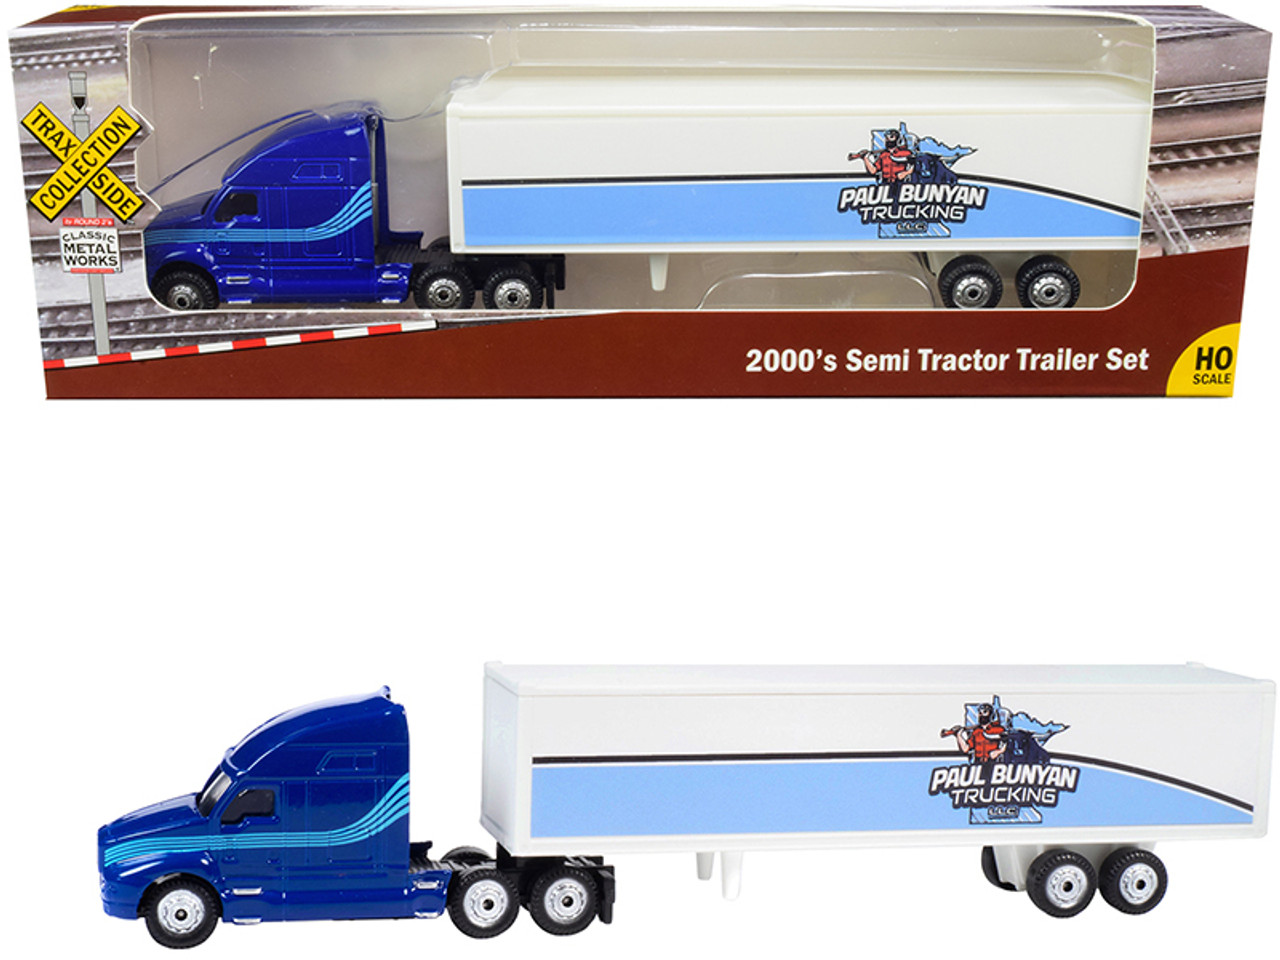 2000's Semi Tractor Trailer Truck Blue and White "Paul Bunyan Trucking LLC" "TraxSide Collection" 1/87 (HO) Scale Diecast Model by Classic Metal Works